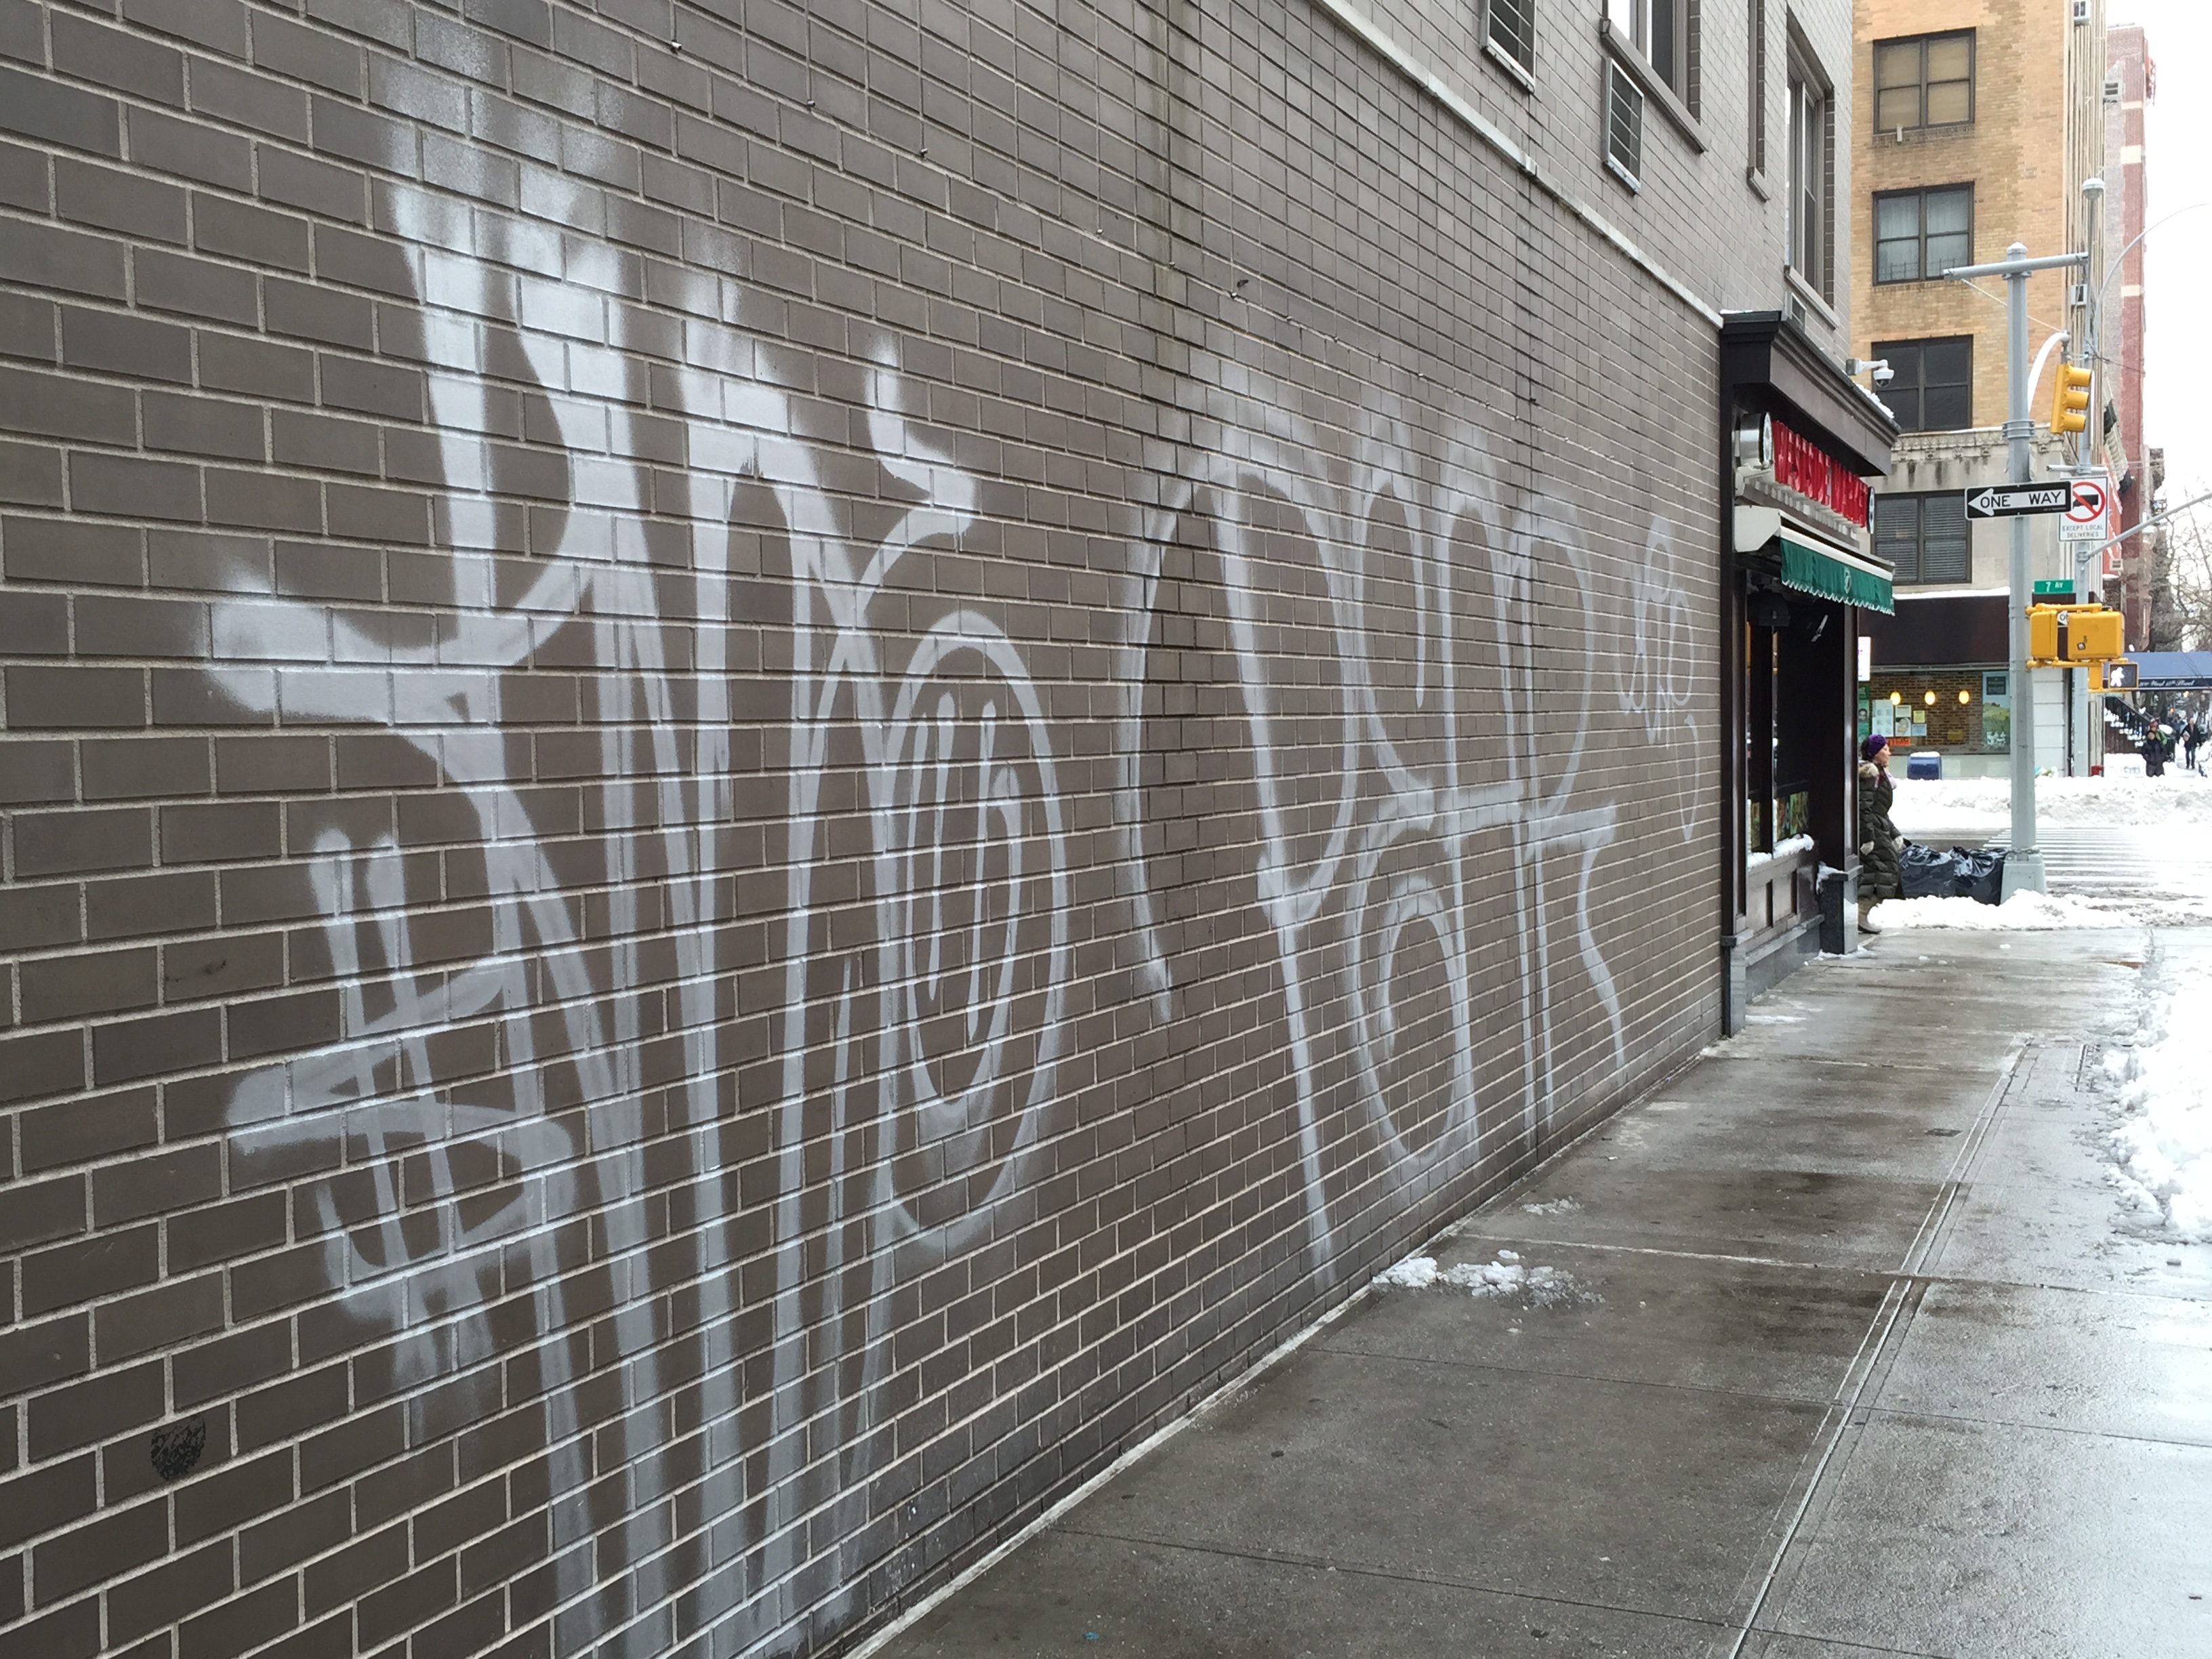 Who Has The Best Graffiti Removal Service Ny?